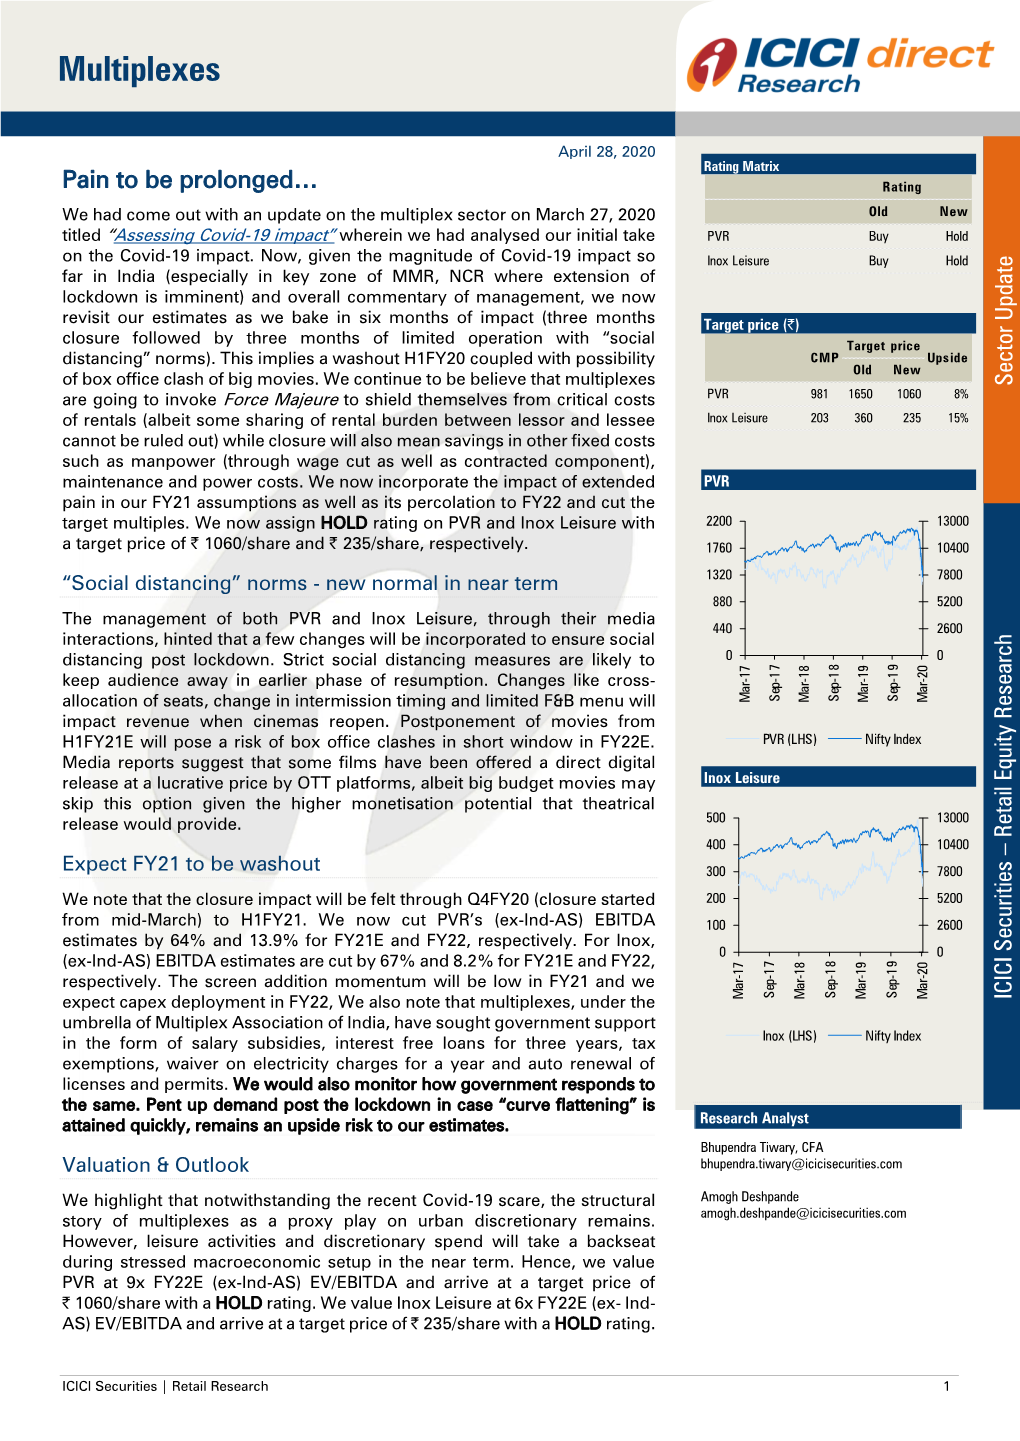 Sector Update | Multiplexes ICICI Direct Research